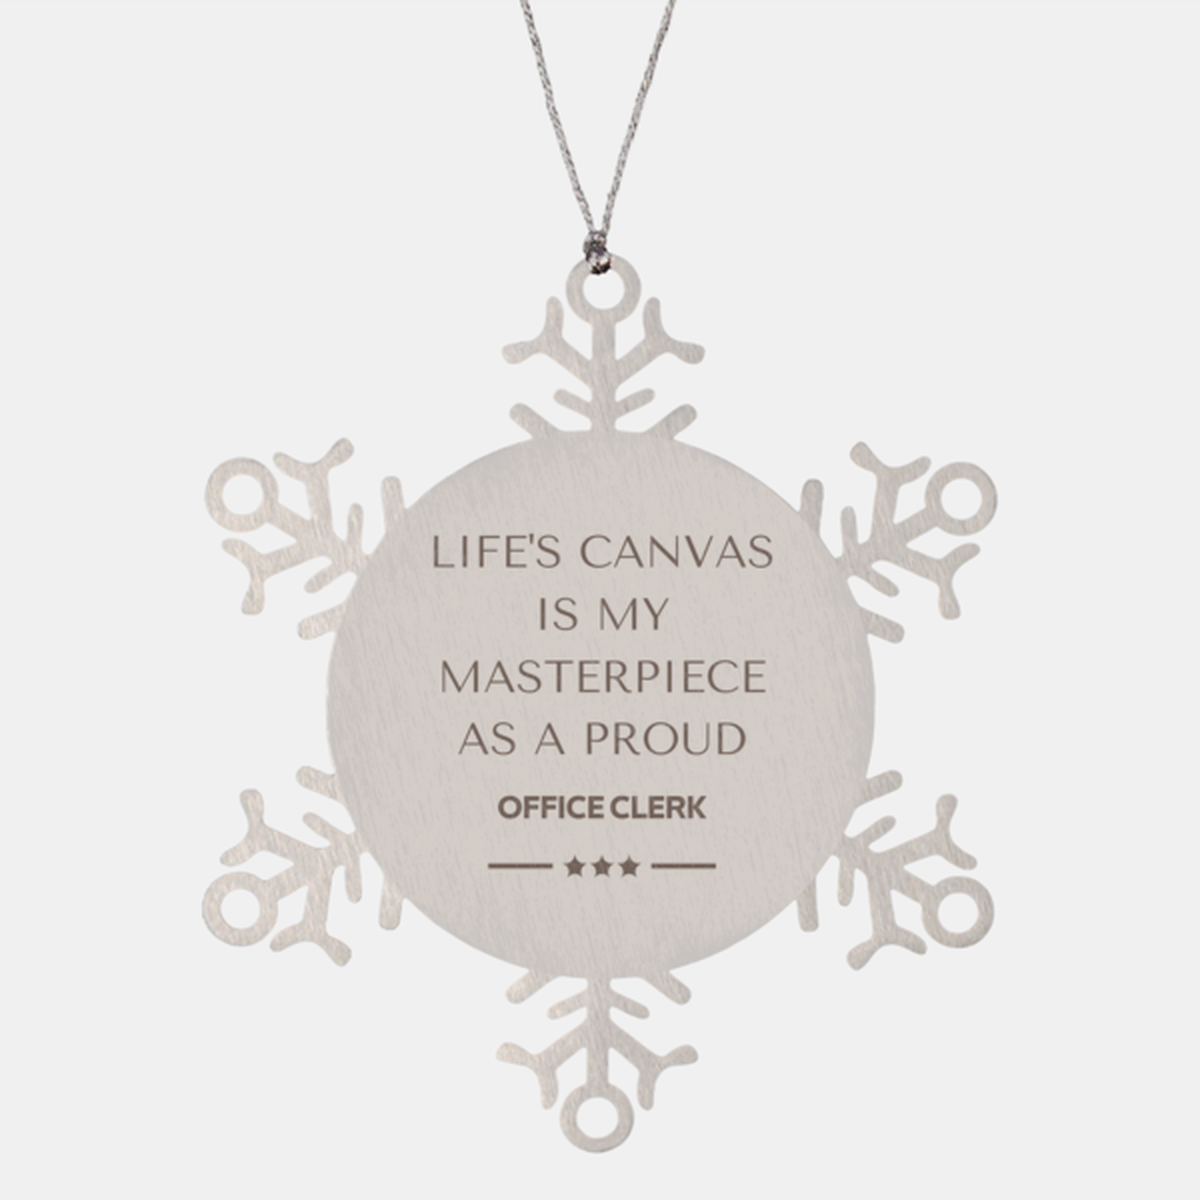 Proud Office Clerk Gifts, Life's canvas is my masterpiece, Epic Birthday Christmas Unique Snowflake Ornament For Office Clerk, Coworkers, Men, Women, Friends